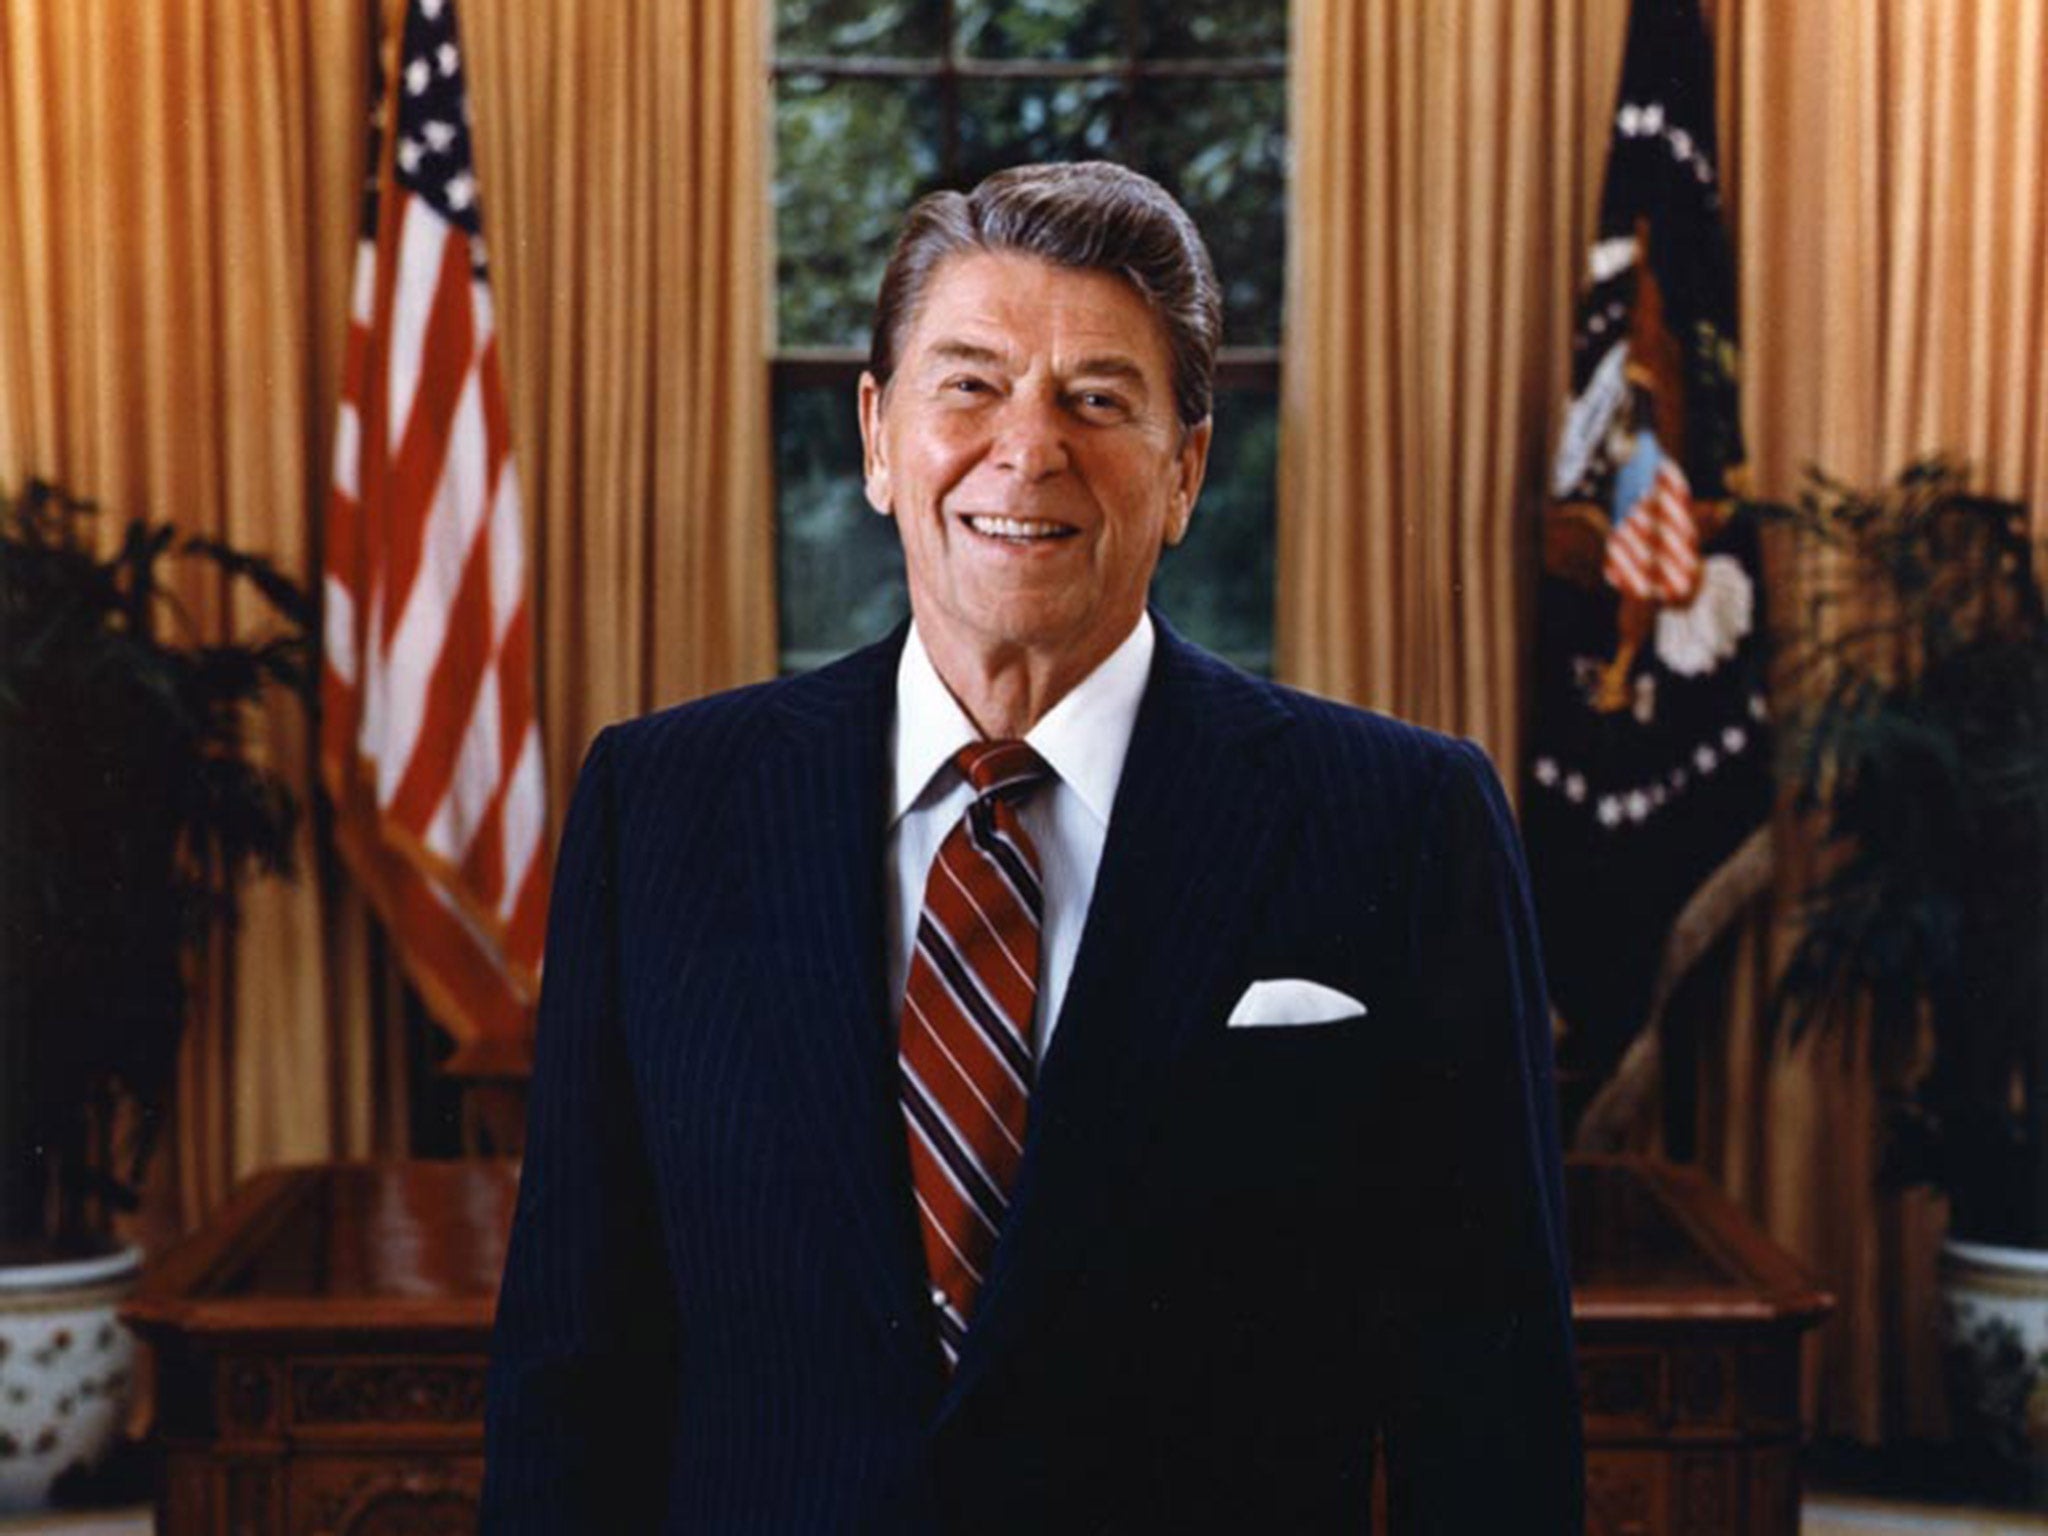 Ronald Reagan advocated relaxed days in the office